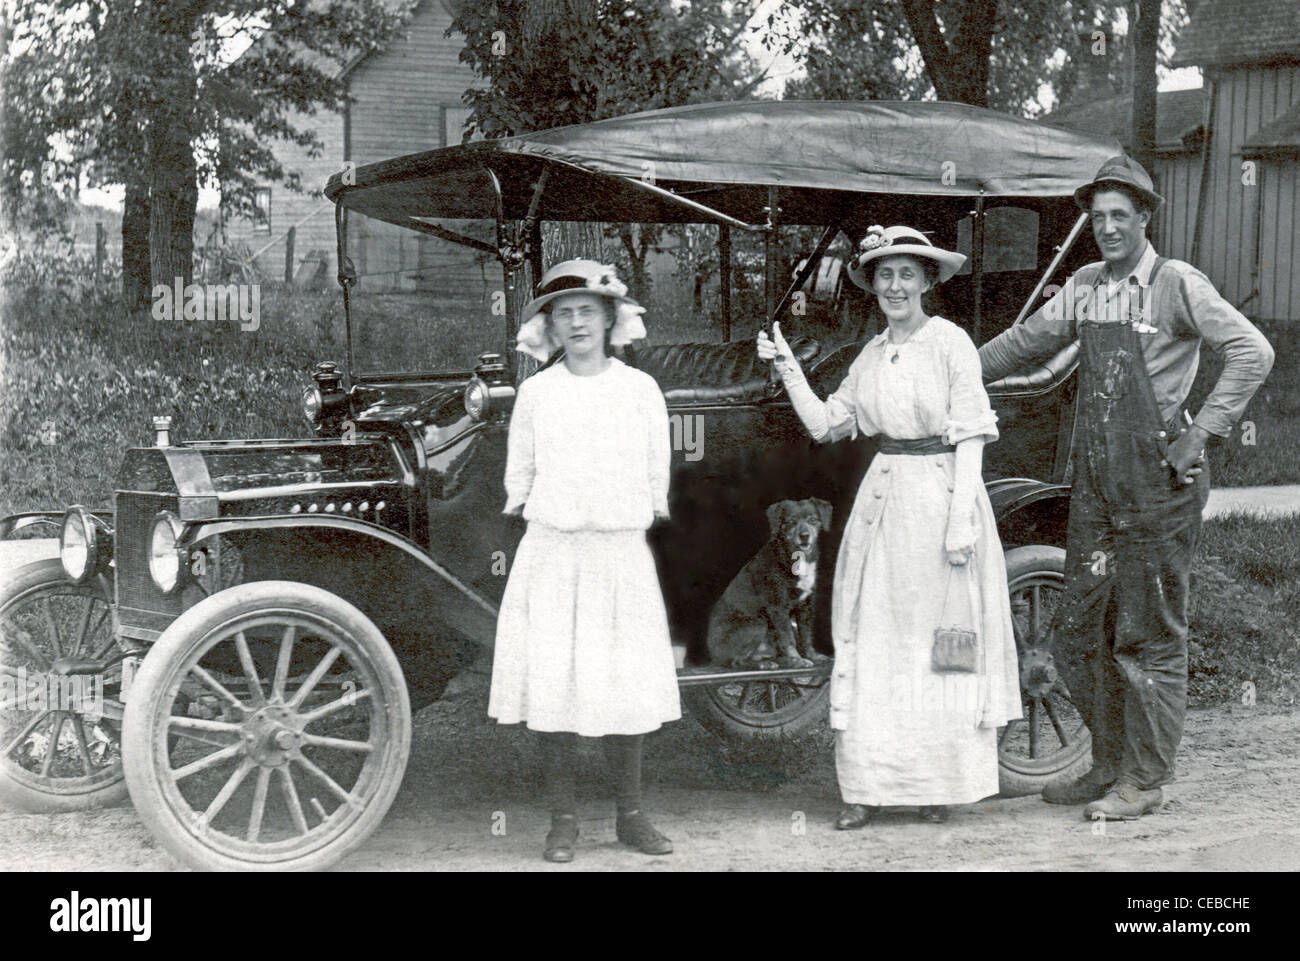 Vintage photograph of an old Ford automobile early 1900s. Stock Photo